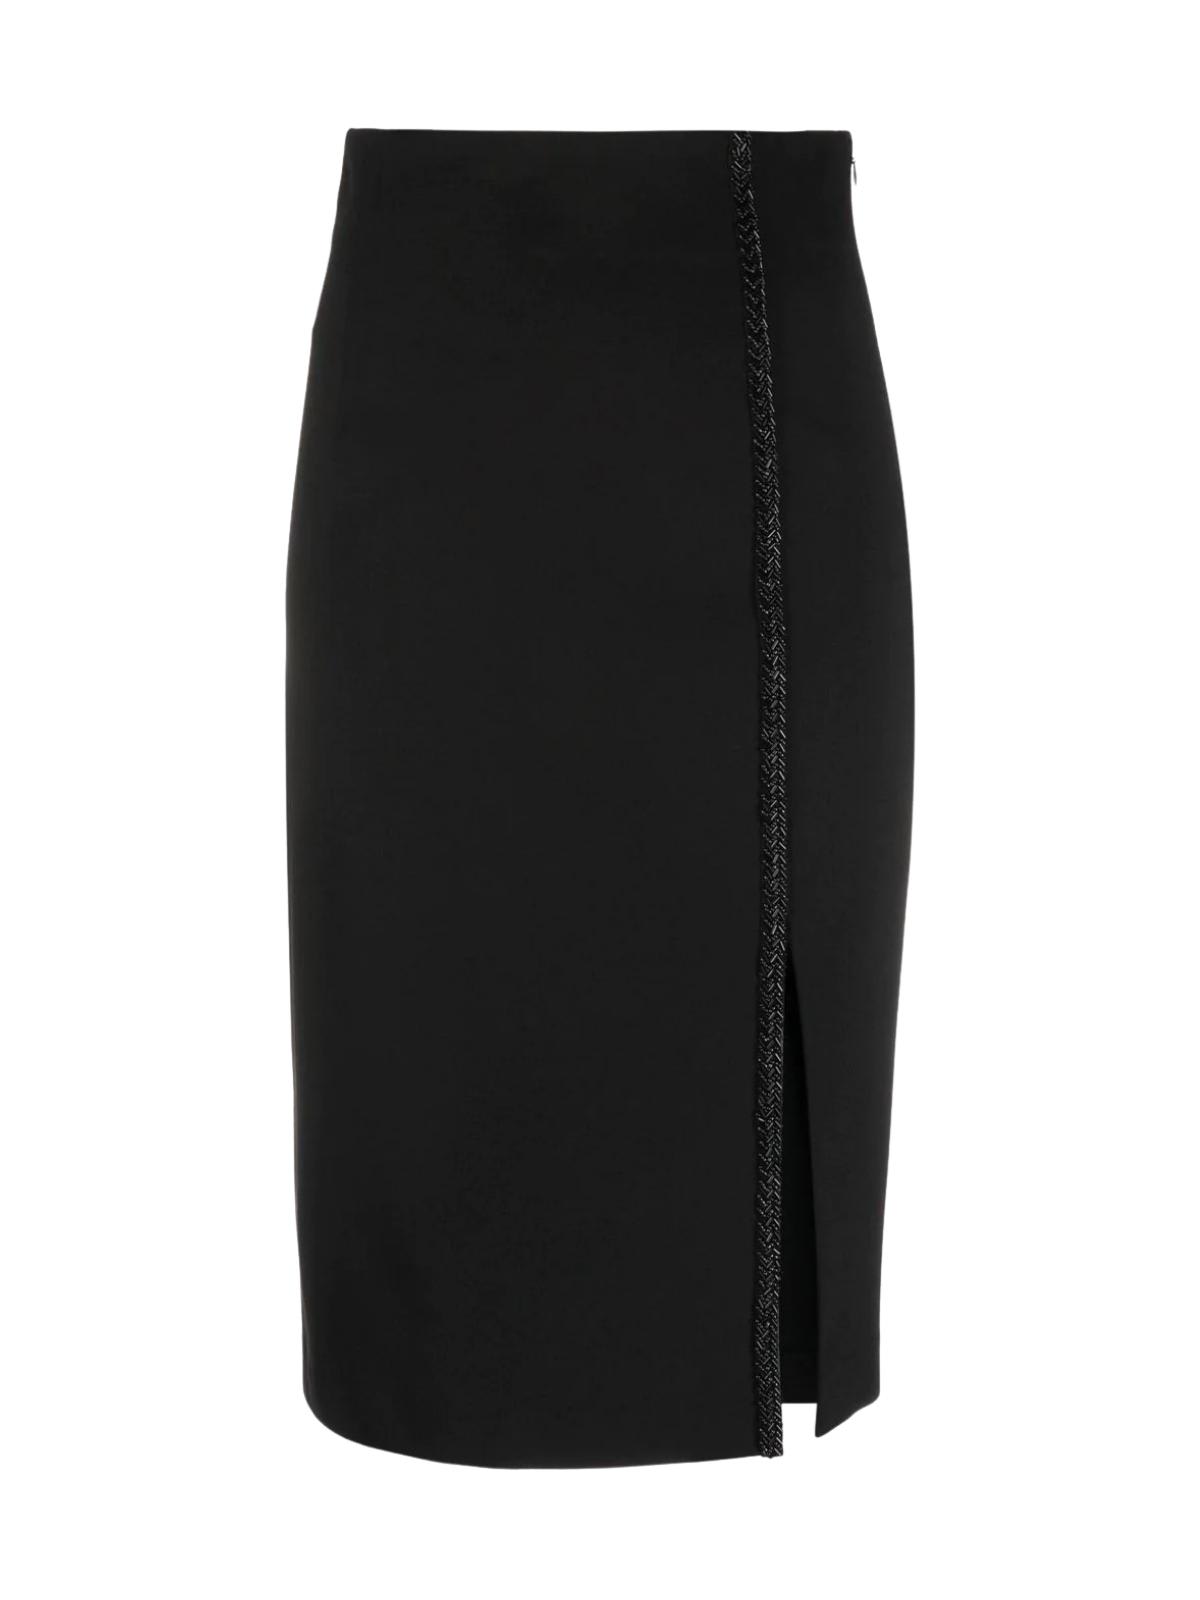 TwinSet Knee Lenght Pencil Skirt